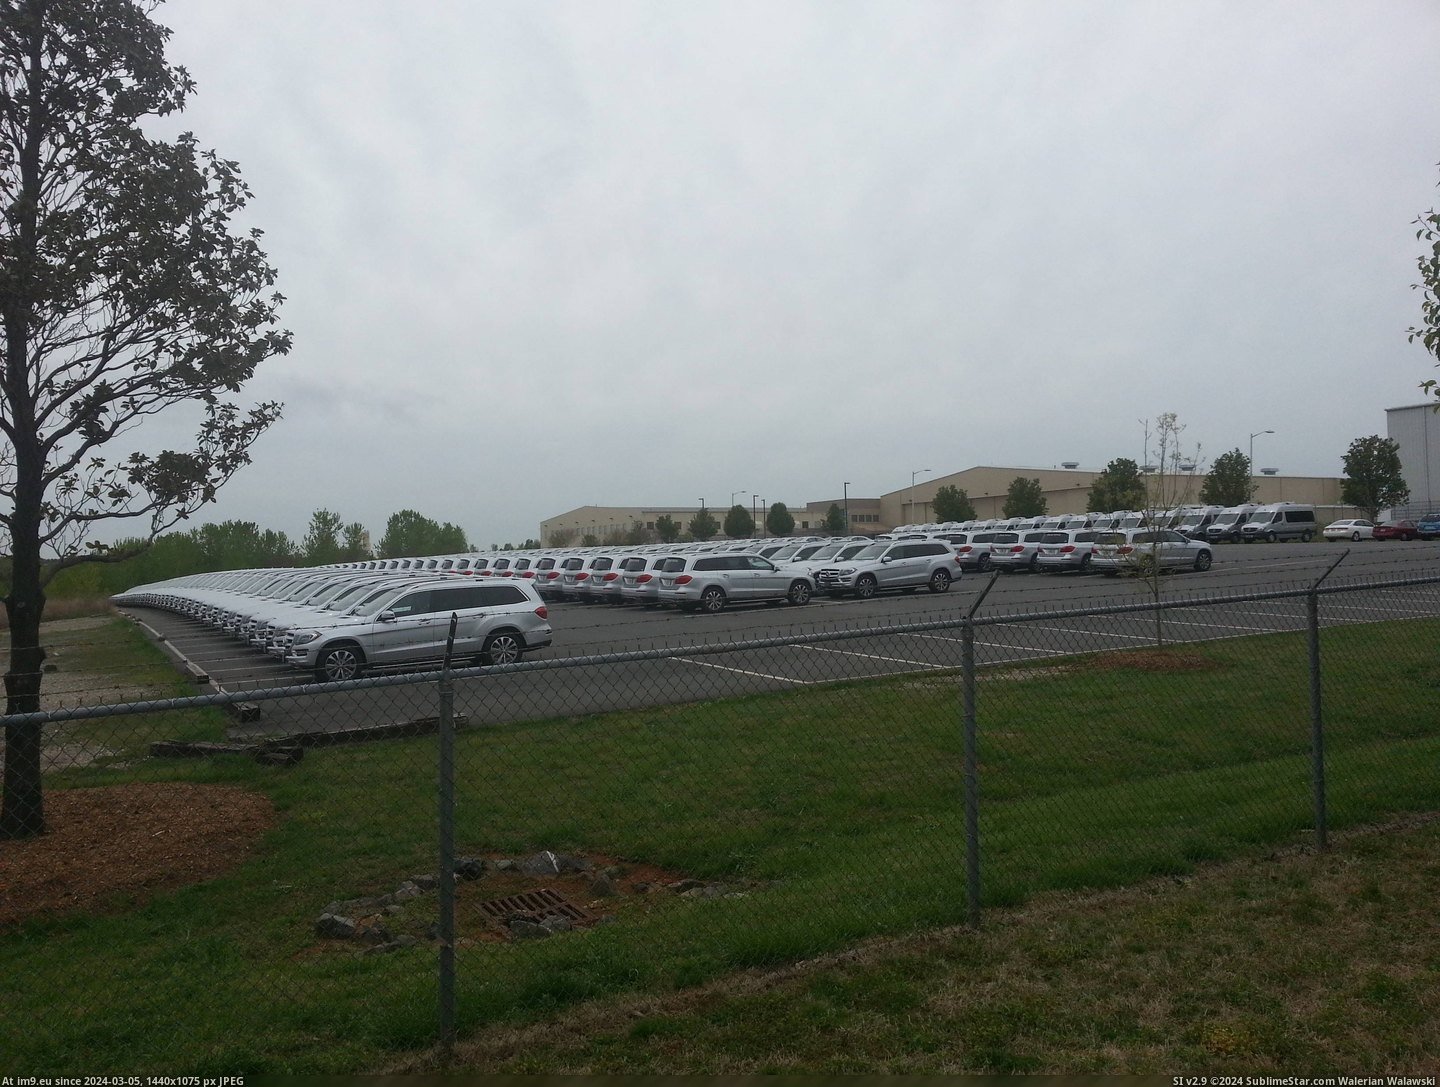 #Full #Entire #Lot #Delivered #Matching #Mercedes #Office #Parking #Silver [Mildlyinteresting] An entire parking lot full of matching silver Mercedes were just delivered next to my office. Pic. (Image of album My r/MILDLYINTERESTING favs))